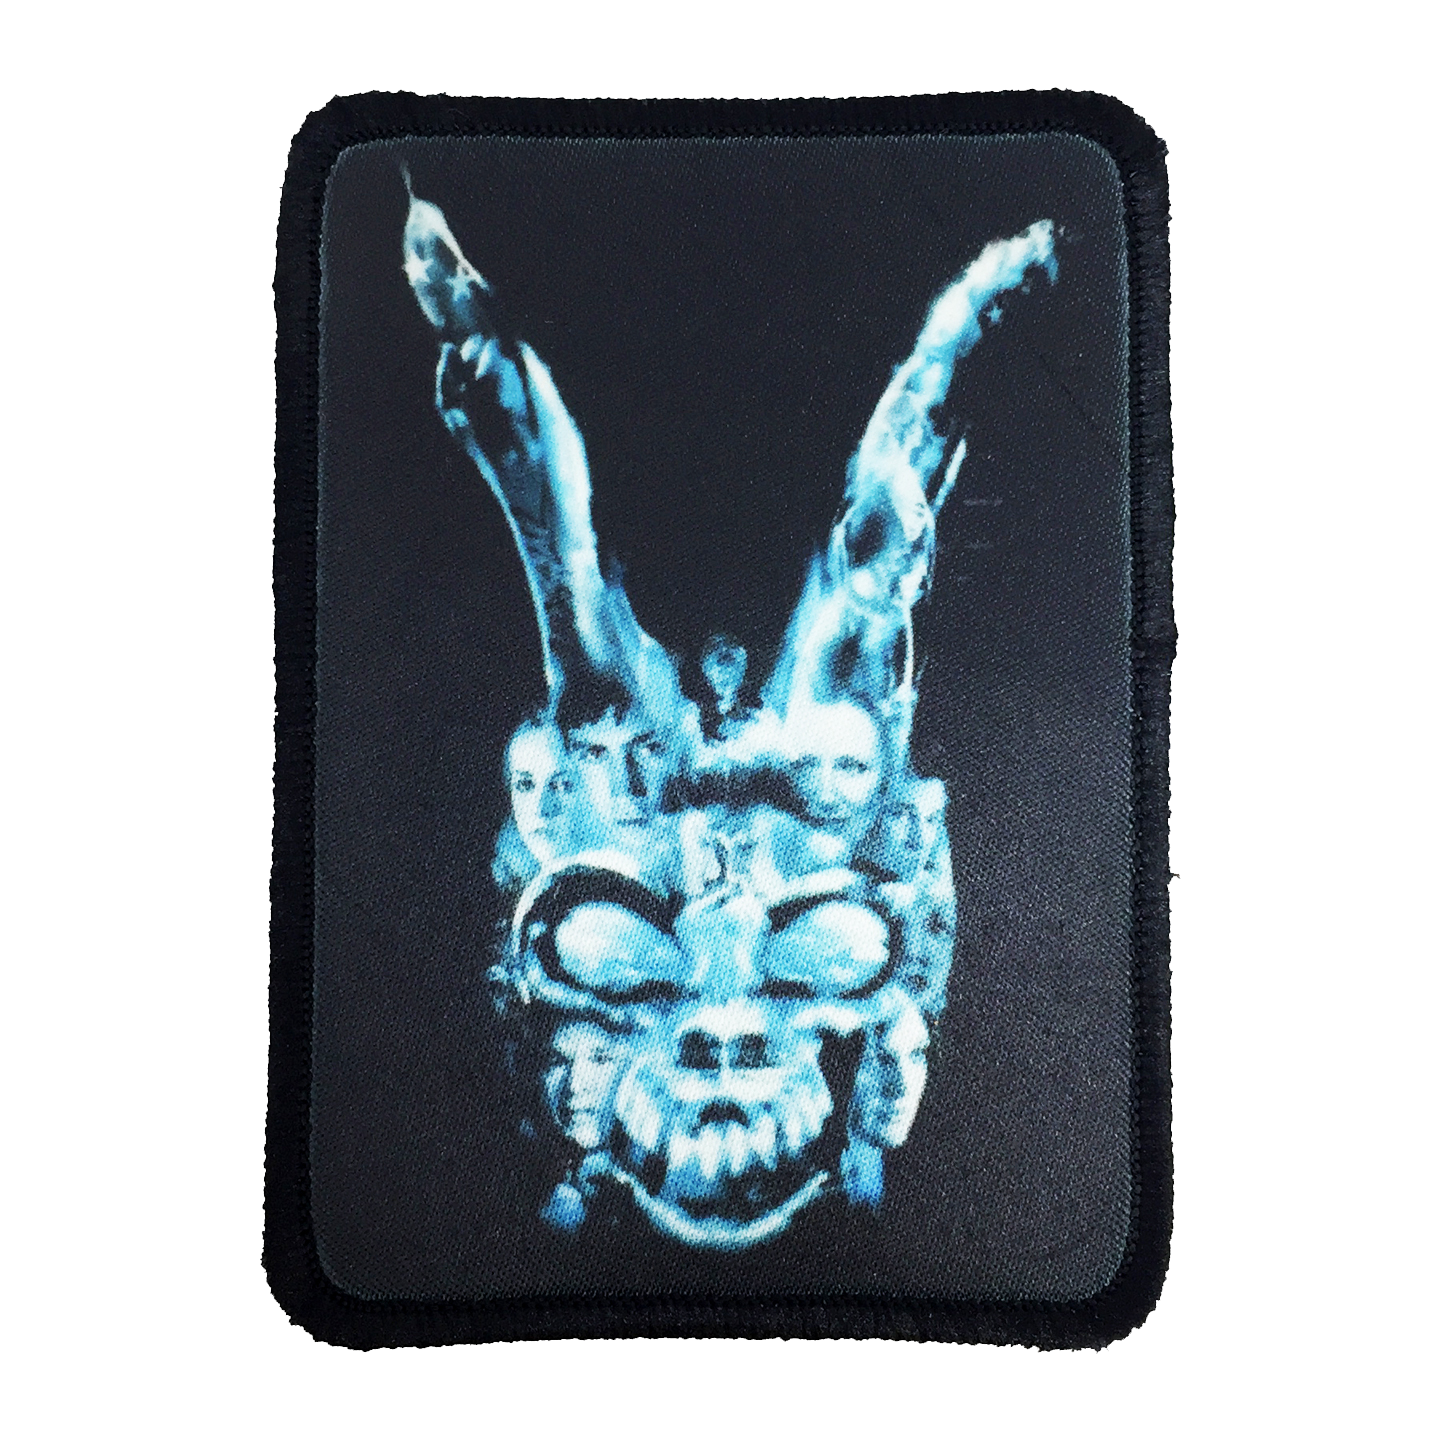 Donnie Darko Iron-On Patch - UNMASKED Horror & Punk Patches and Decor